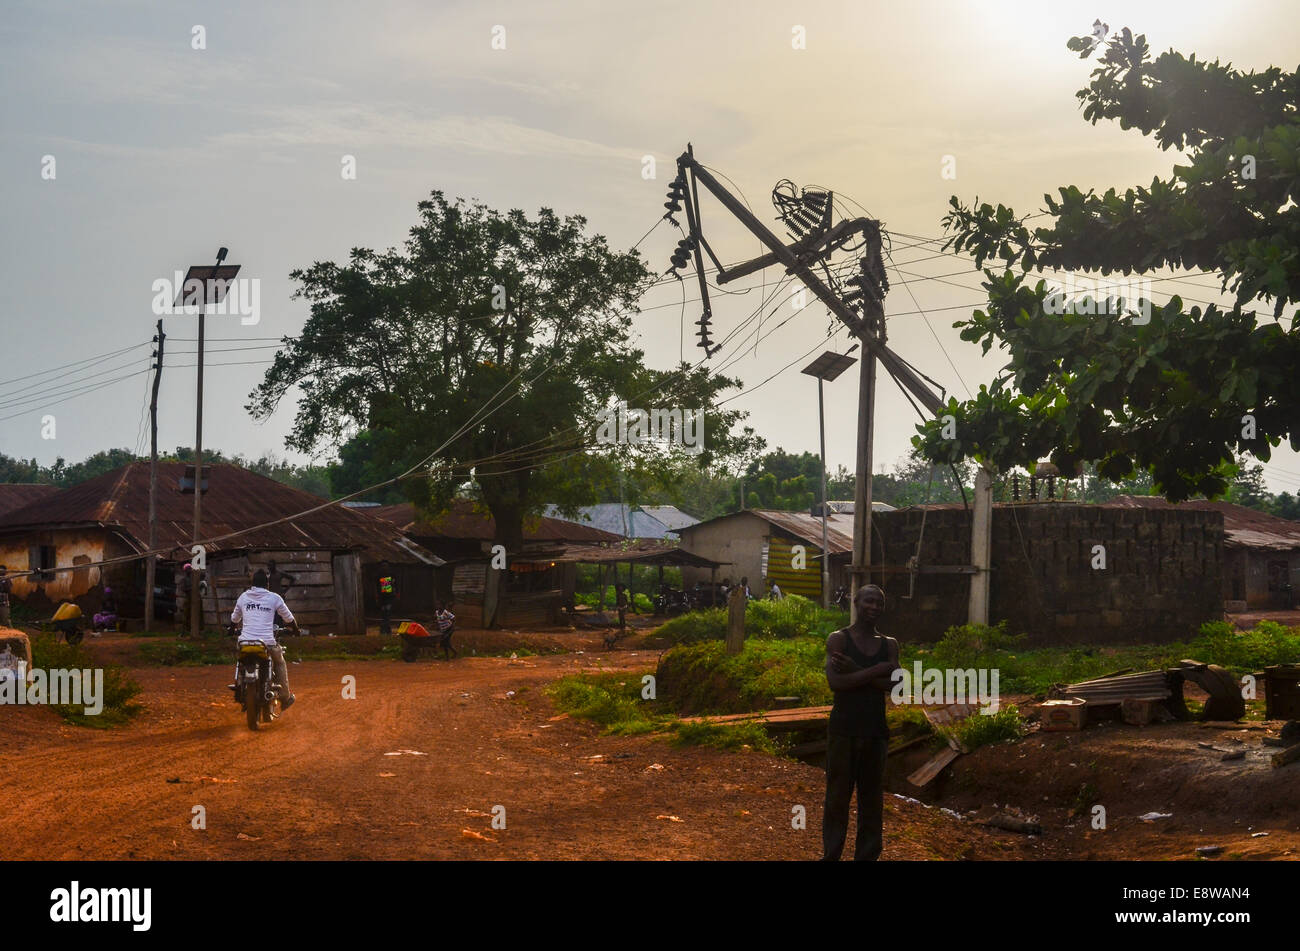 Rural Nigeria showing poor electrification and little access to energy, and a public lamp using a solar panel Stock Photo